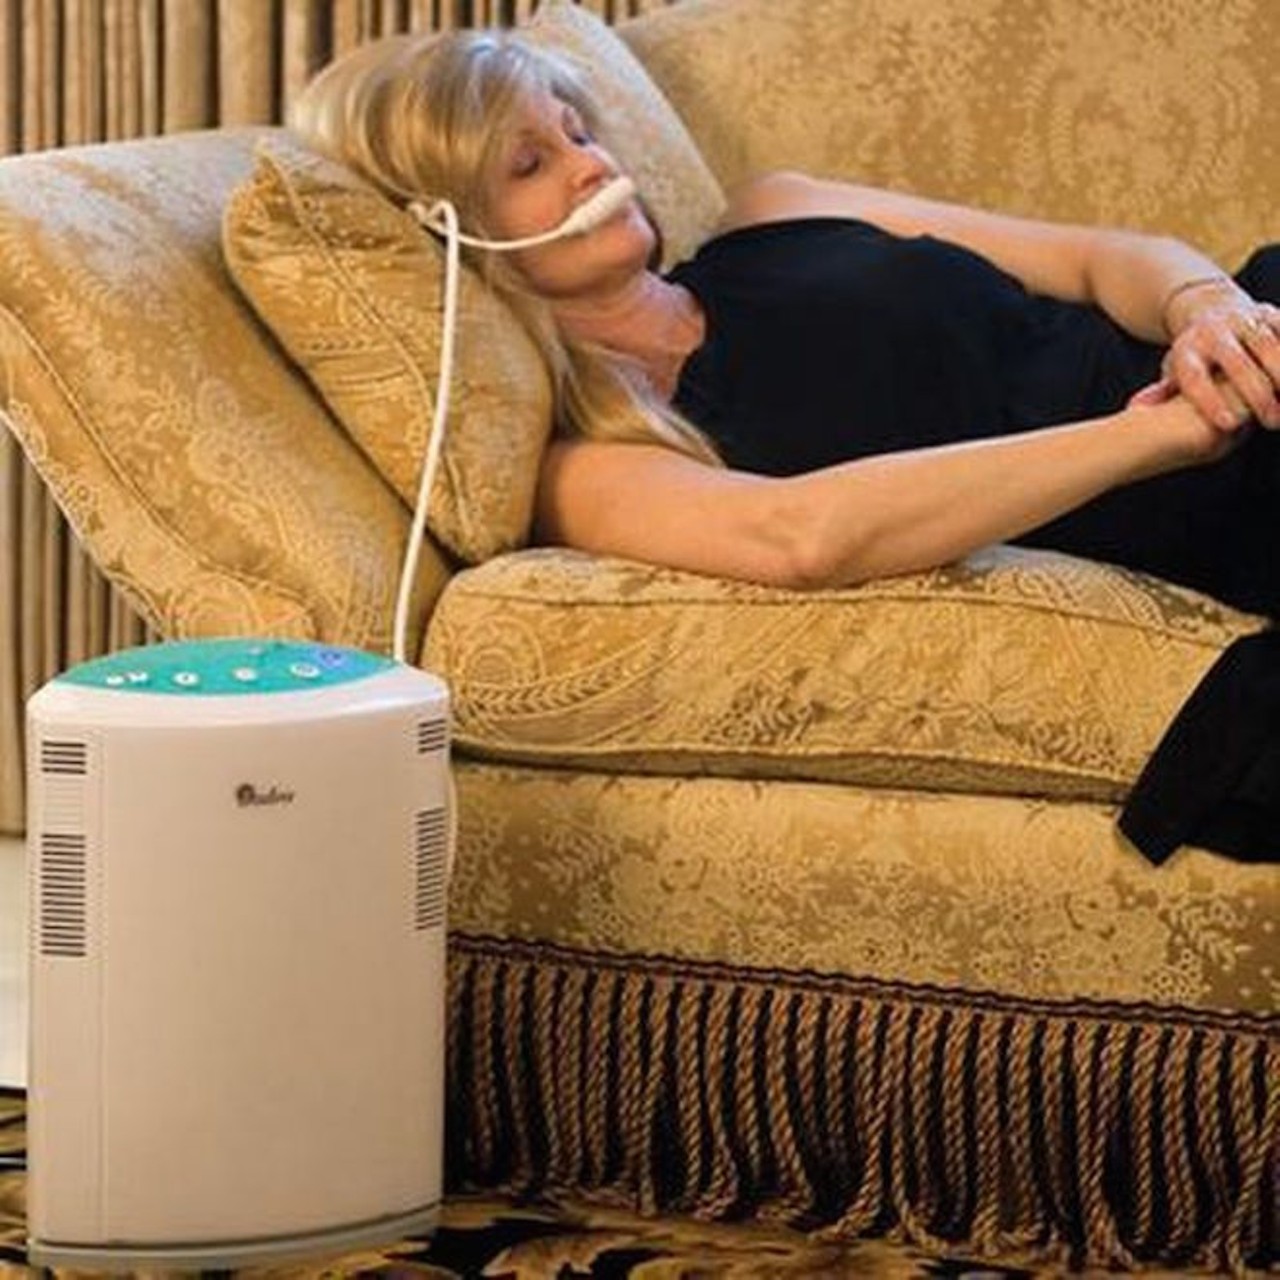 Your own personal oxygen bar.